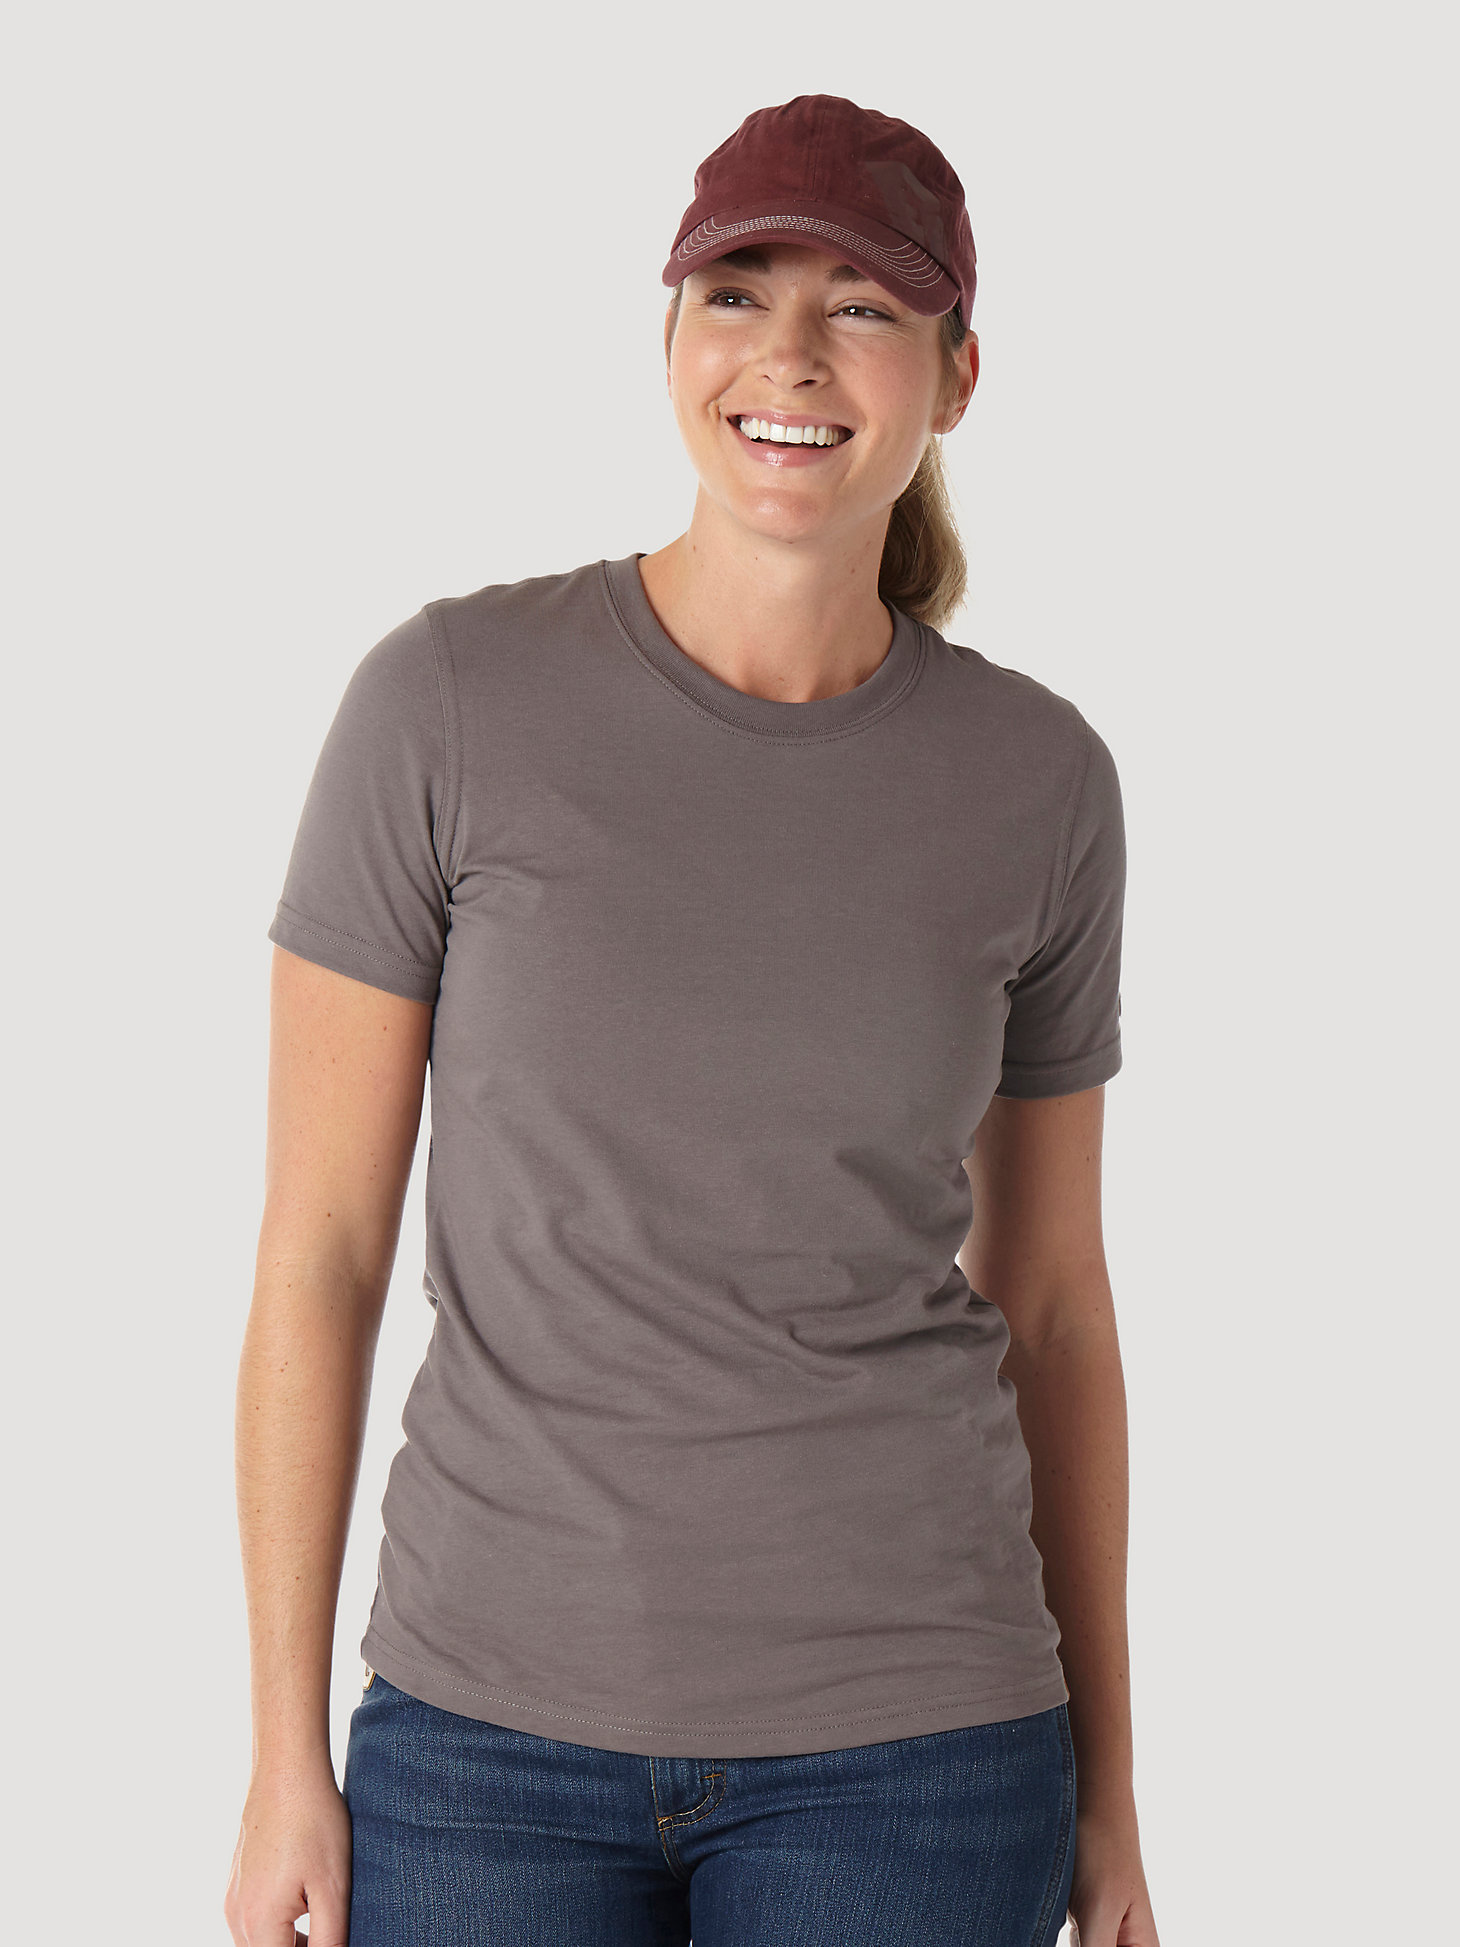 Women's Wrangler® RIGGS Workwear® Short Sleeve Performance T-Shirt in Charcoal alternative view 1